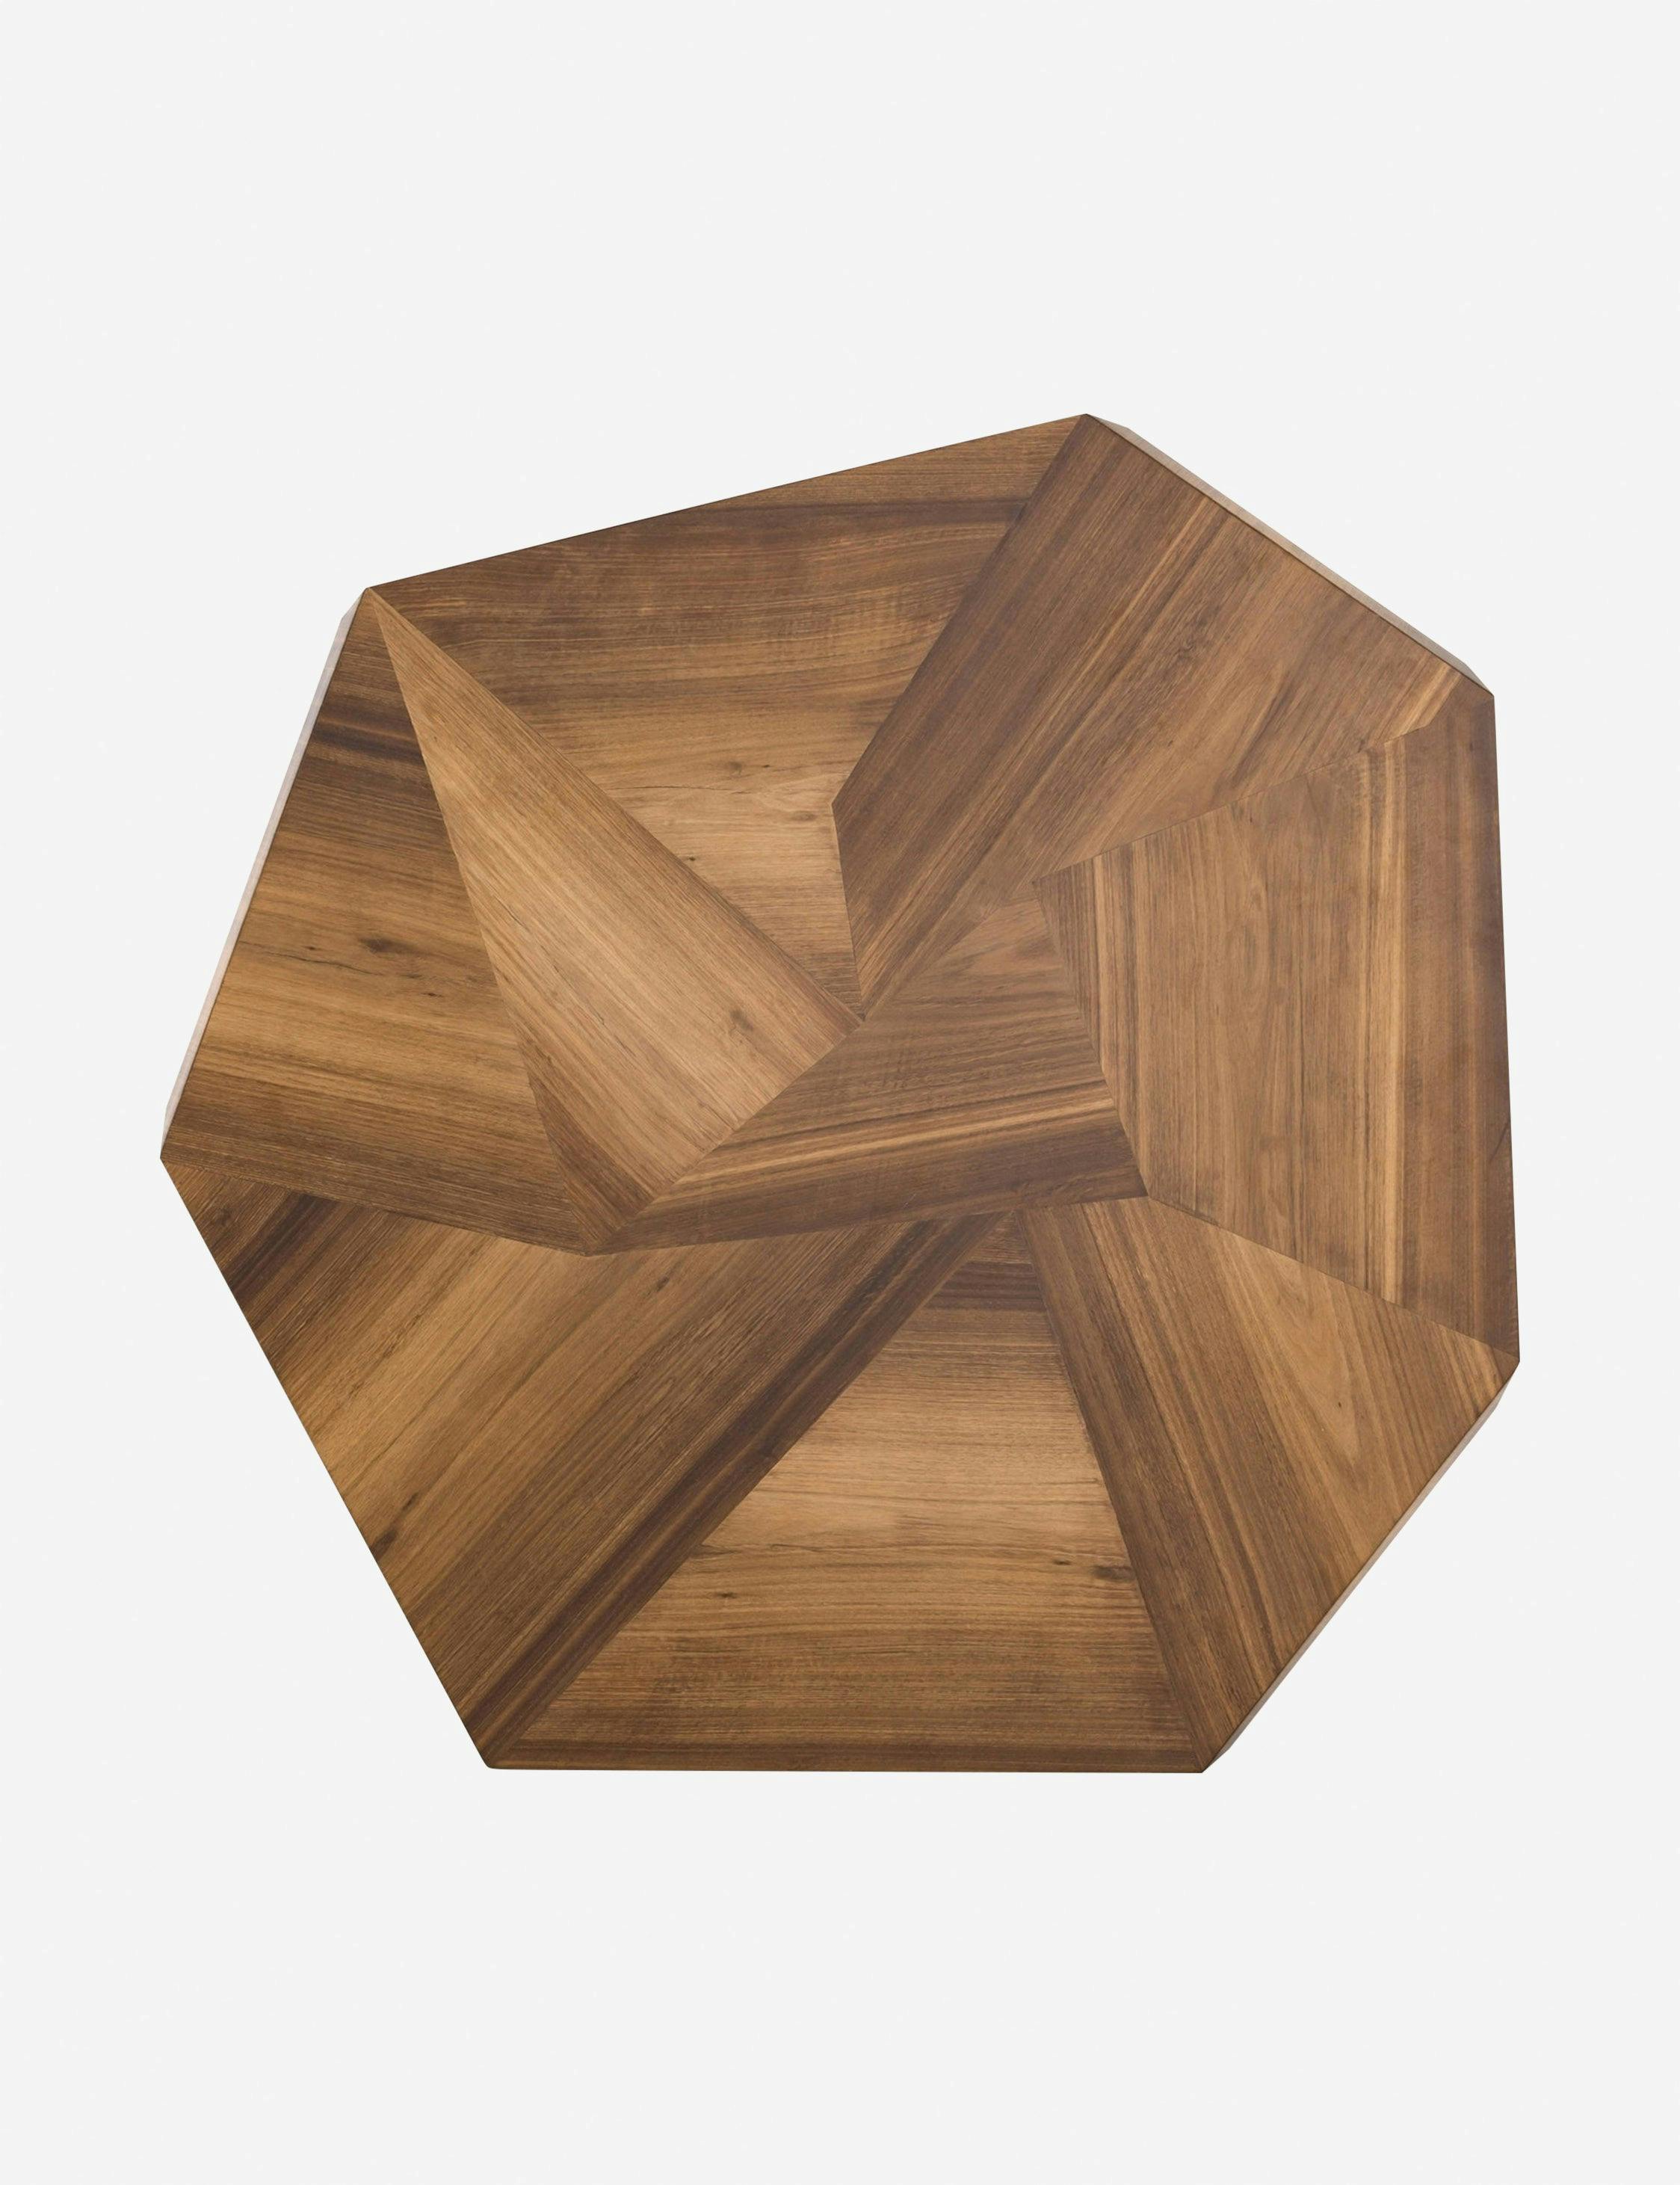 Casual Reclaimed Wood Hexagonal Dining Table in Rich Brown